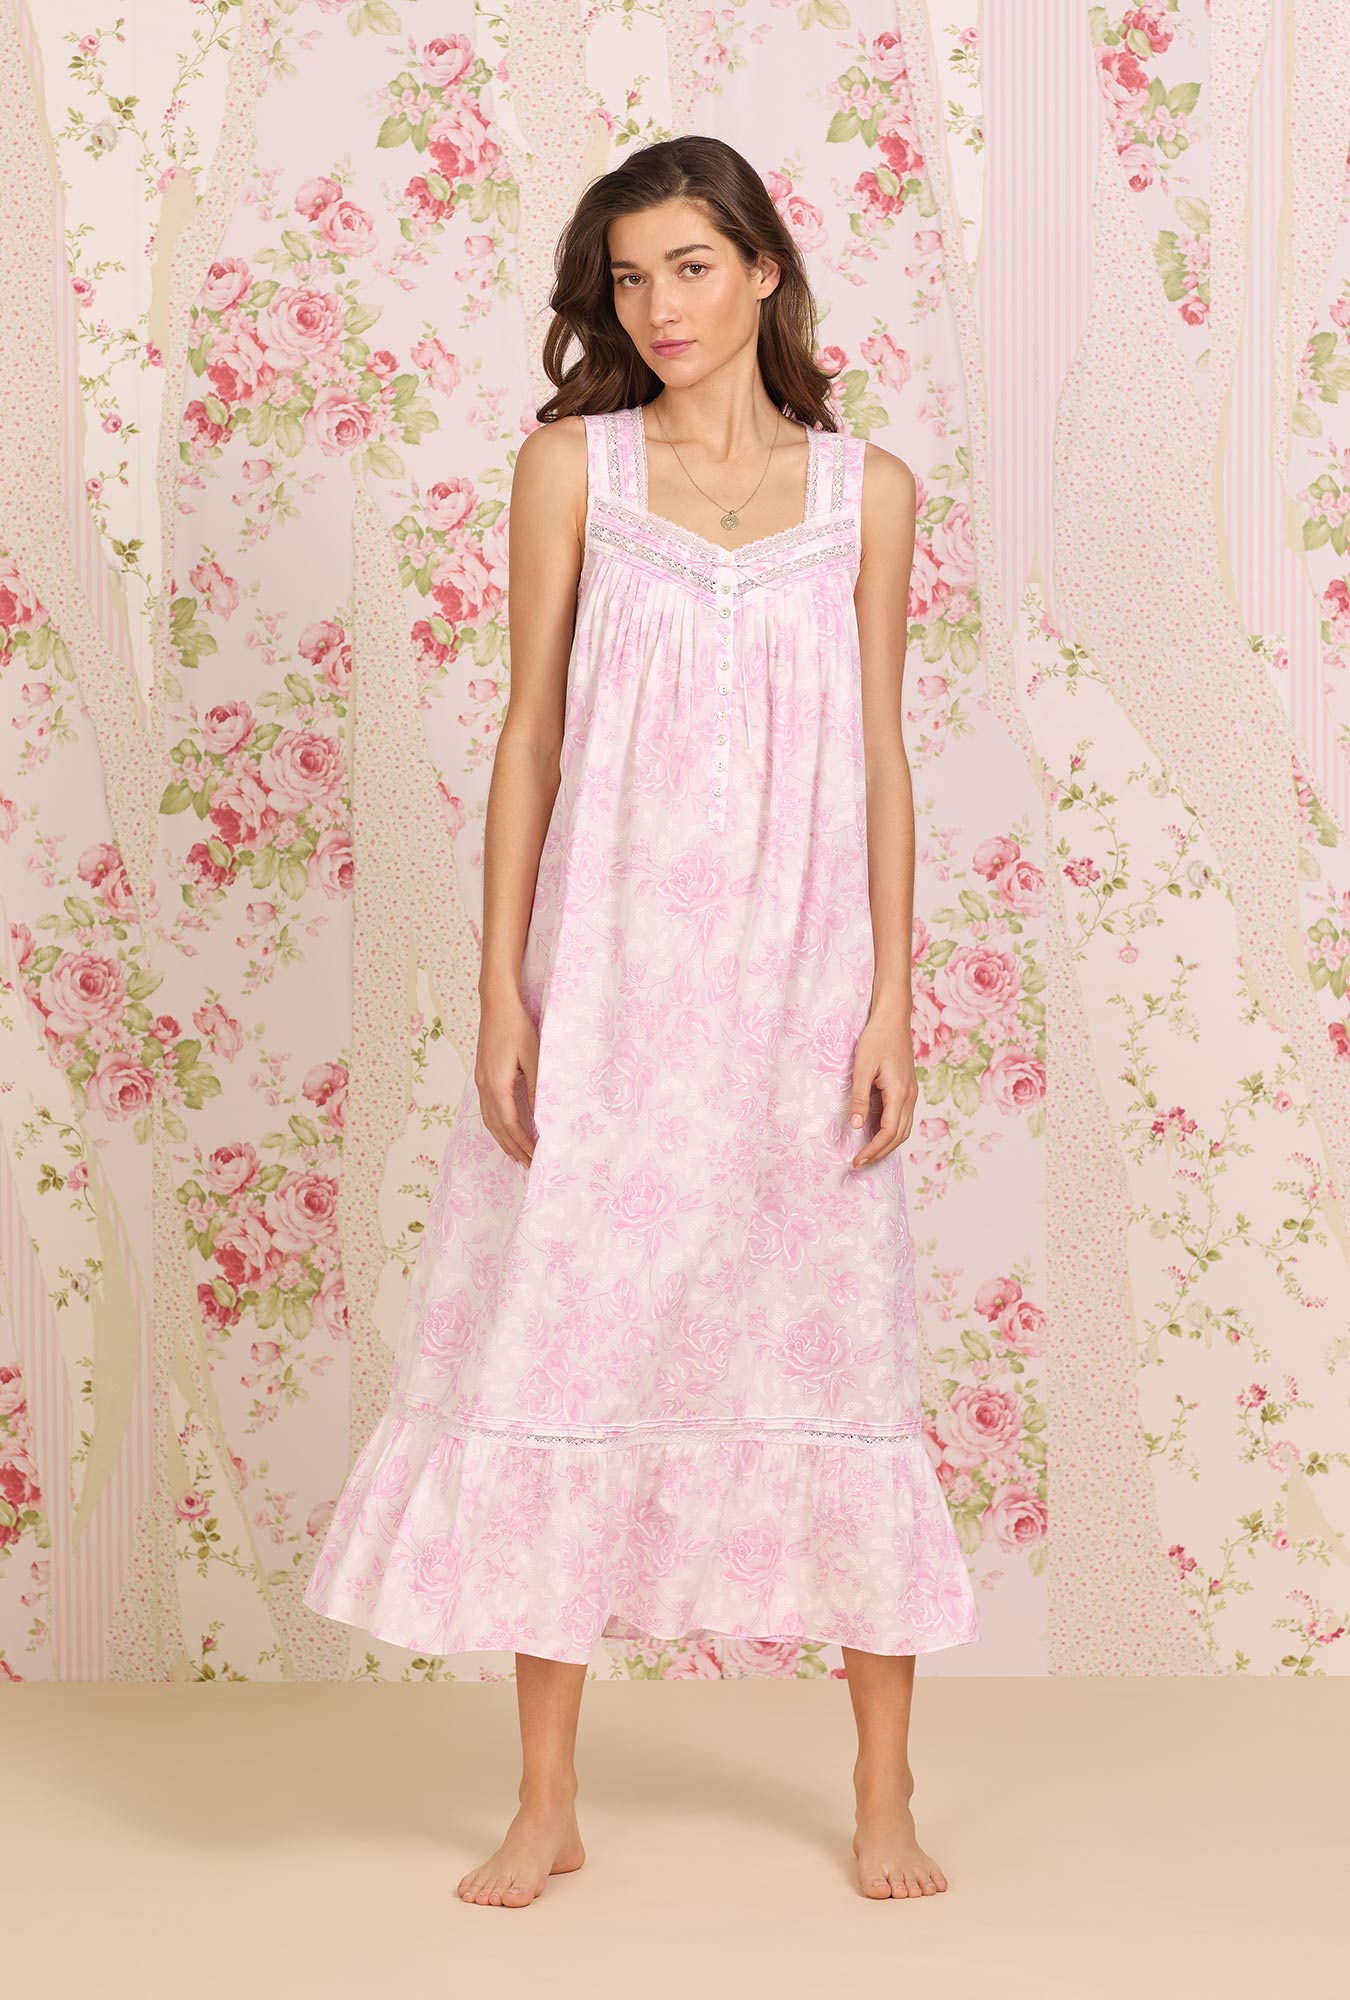  A lady wearing pink sleeveless Cotton Nightgown with  Romantic Roses print